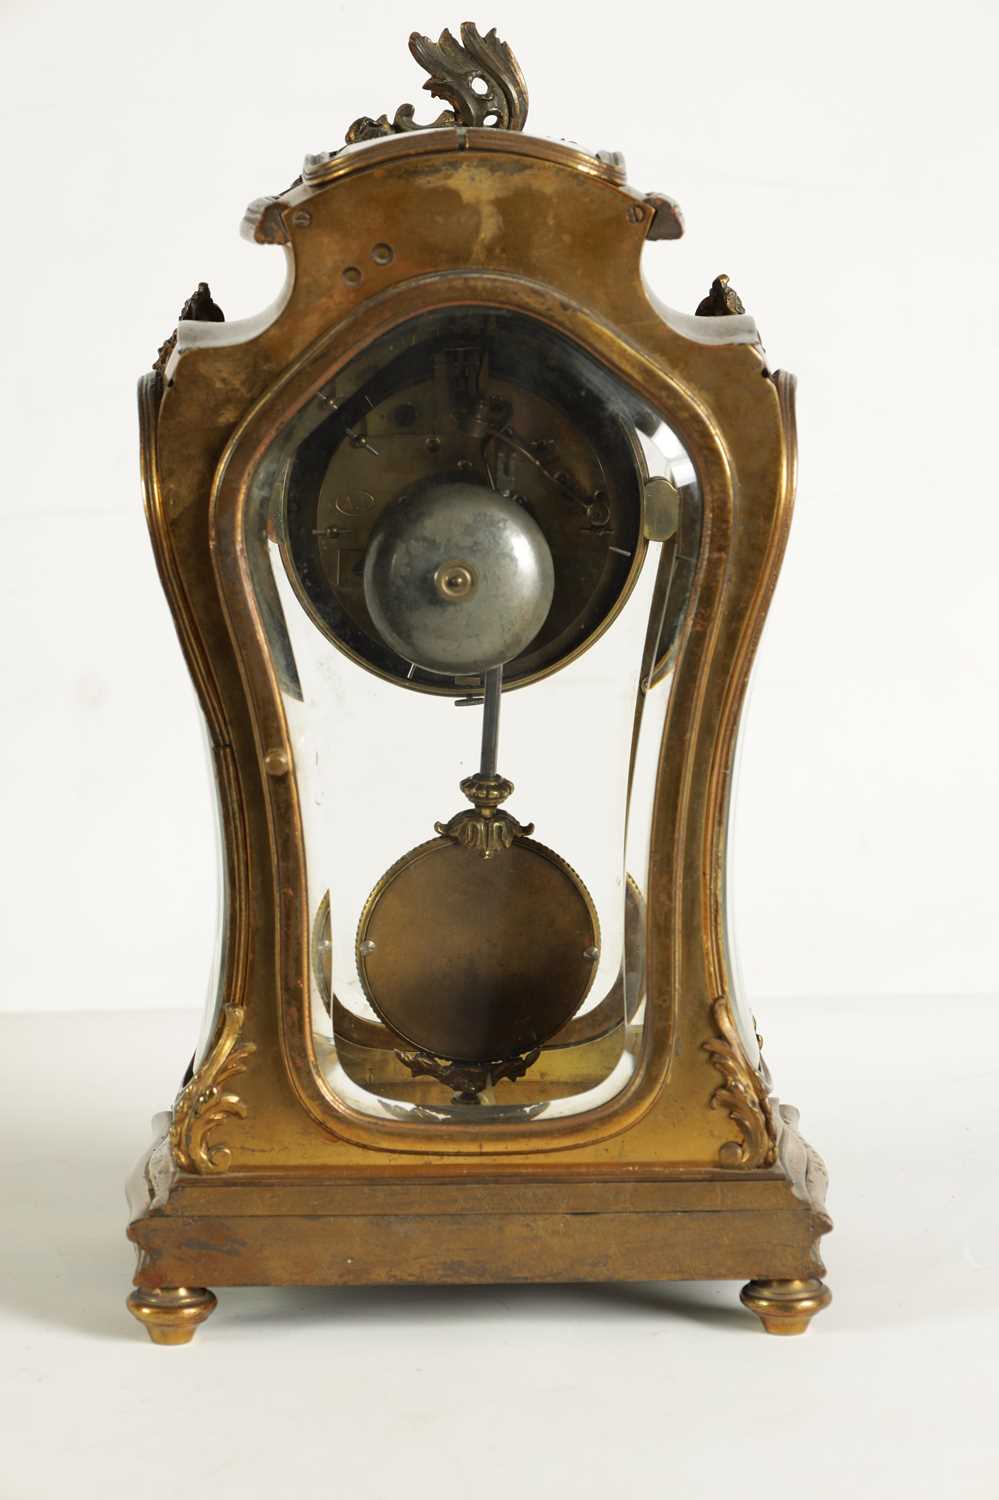 A LATE 19TH CENTURY FRENCH ART NOUVEAU GILT BRASS FOUR GLASS MANTEL CLOCK - Image 7 of 13